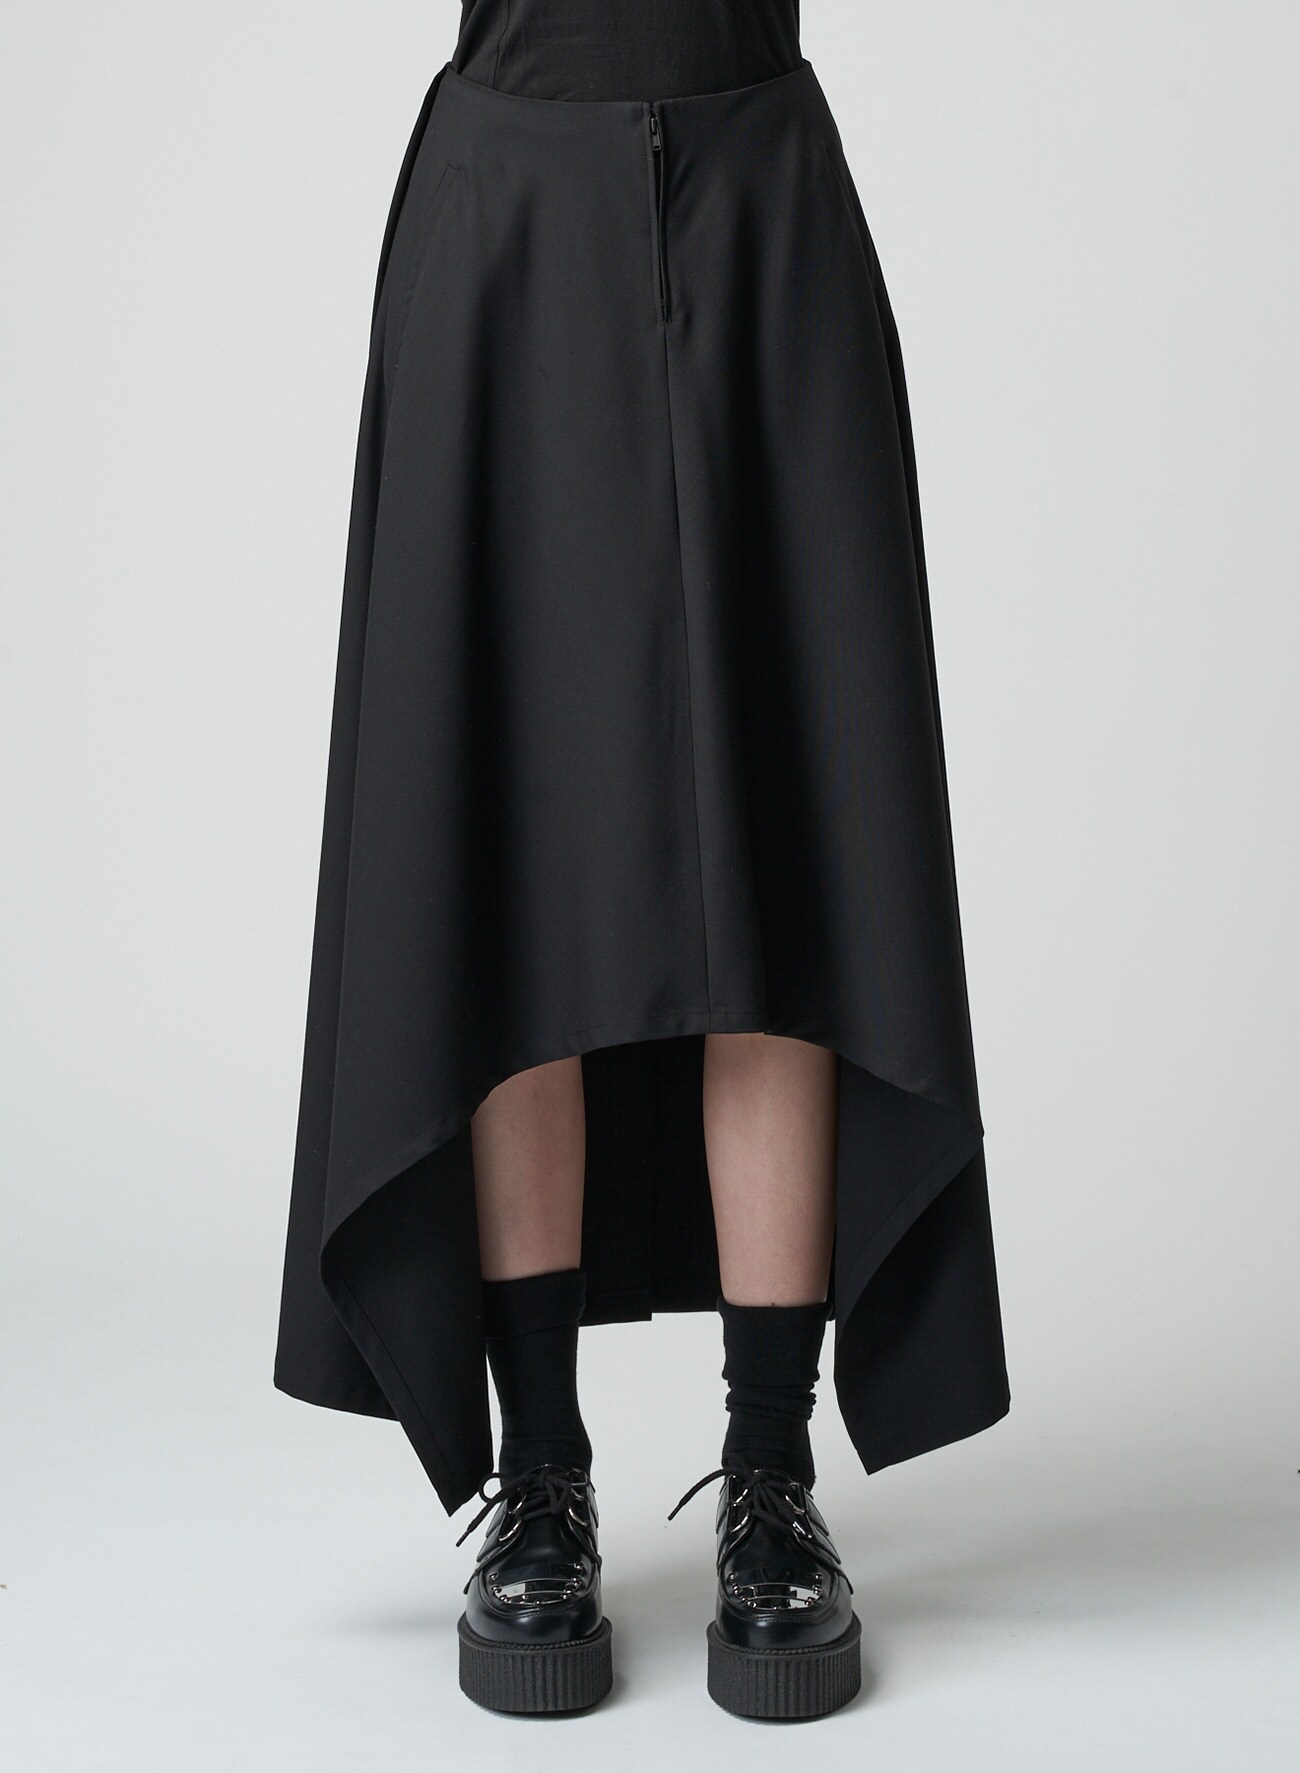 WOOL/POLYESTER SERGE PLEATED SKIRT(S Black): LIMI feu｜THE SHOP